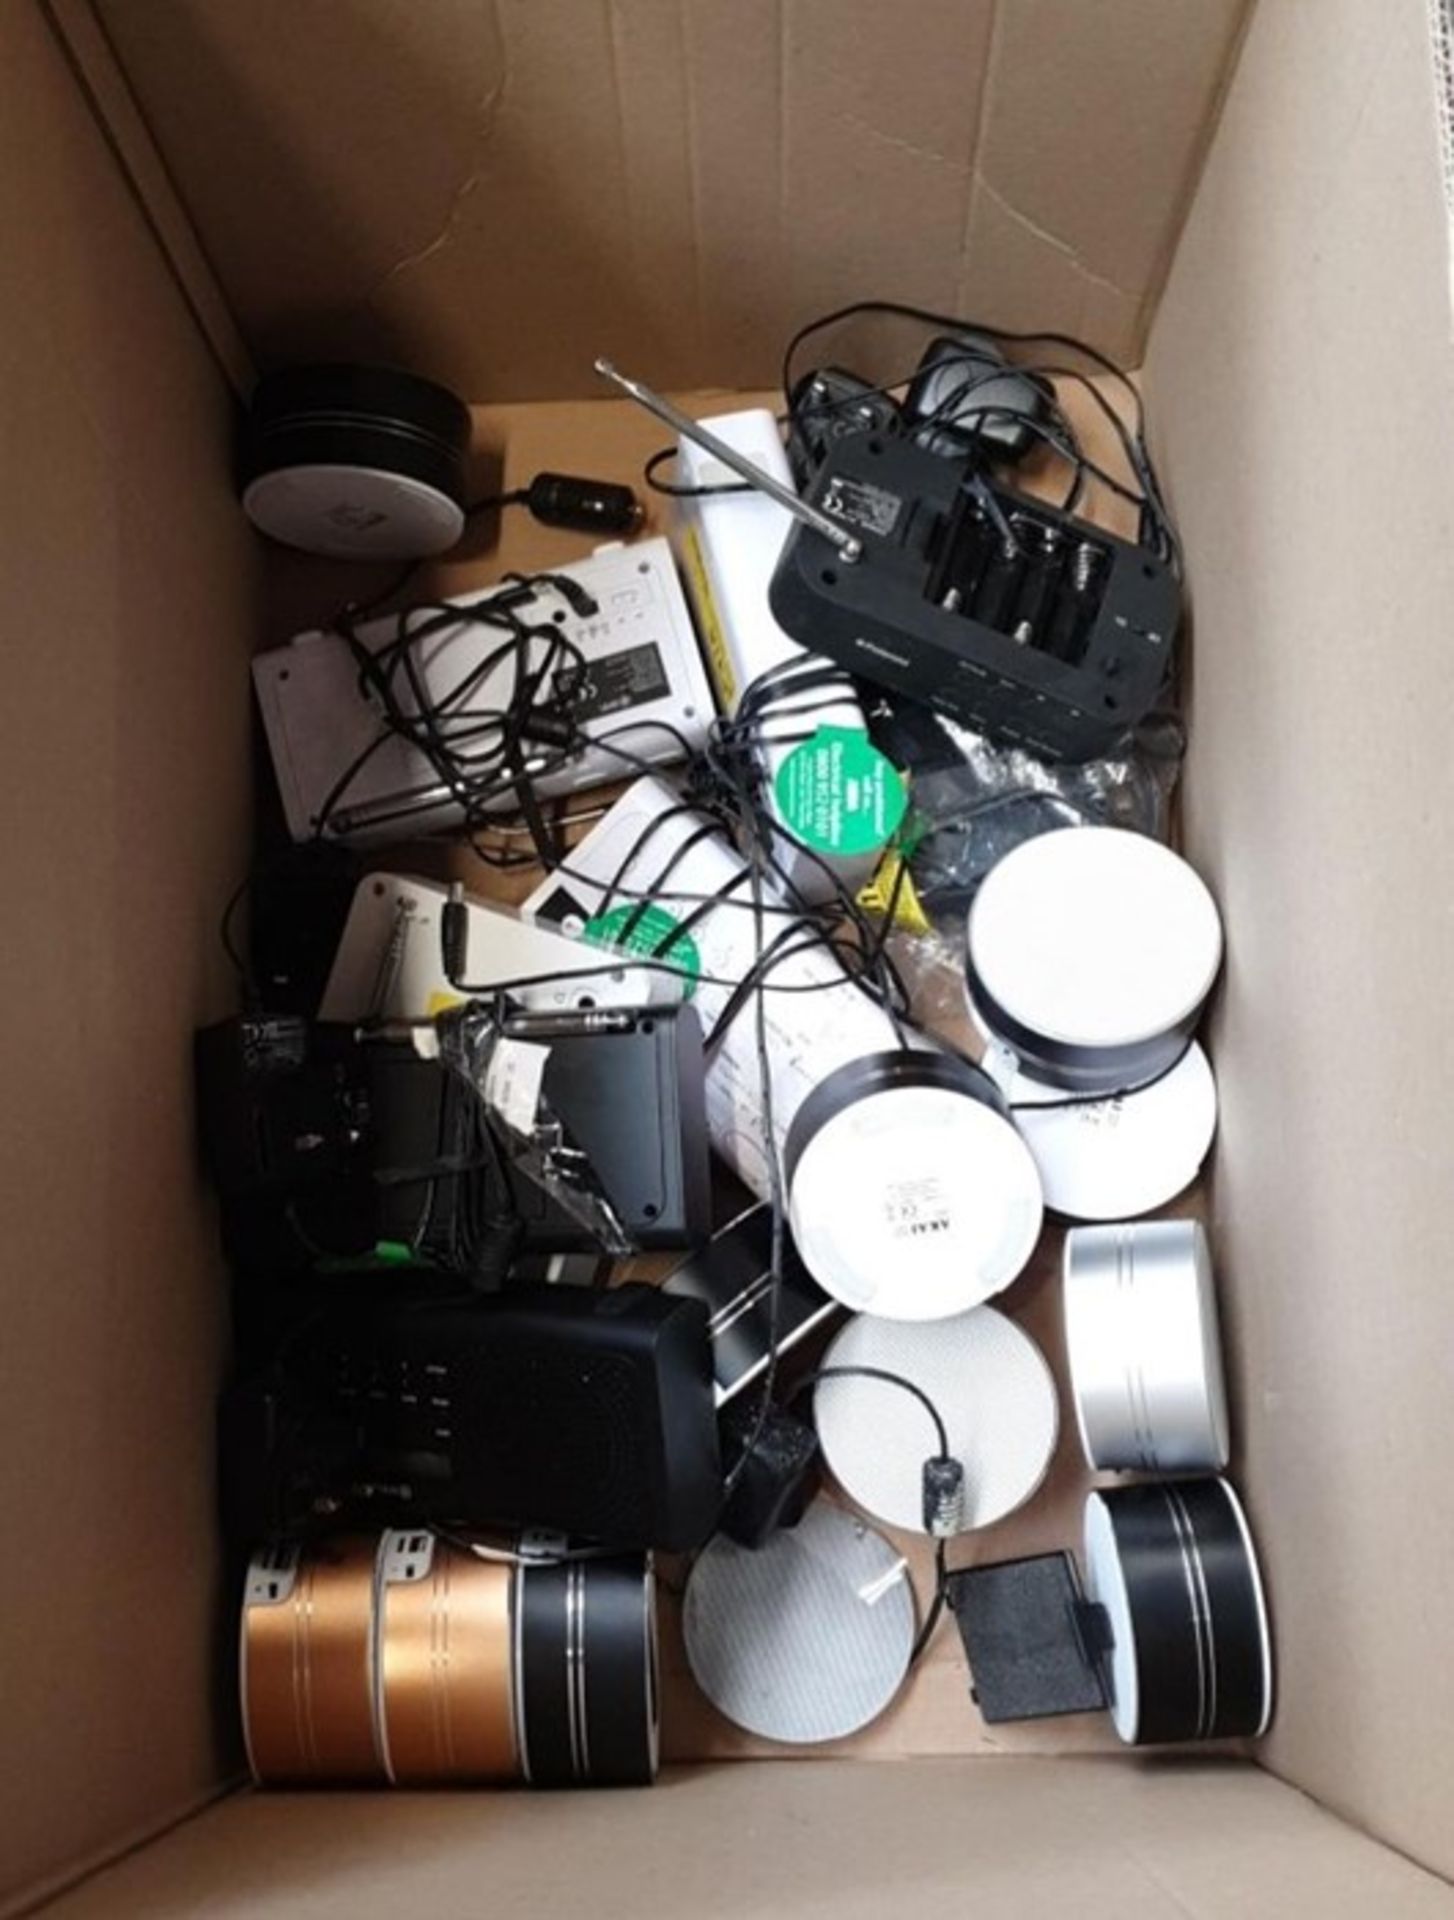 1 LOT TO CONTAIN VARIOUS ELECTRICAL ITEMS INCLUDING DYNMX BLUETOOTH SPEAKERS, ONN DAB RADIOS,